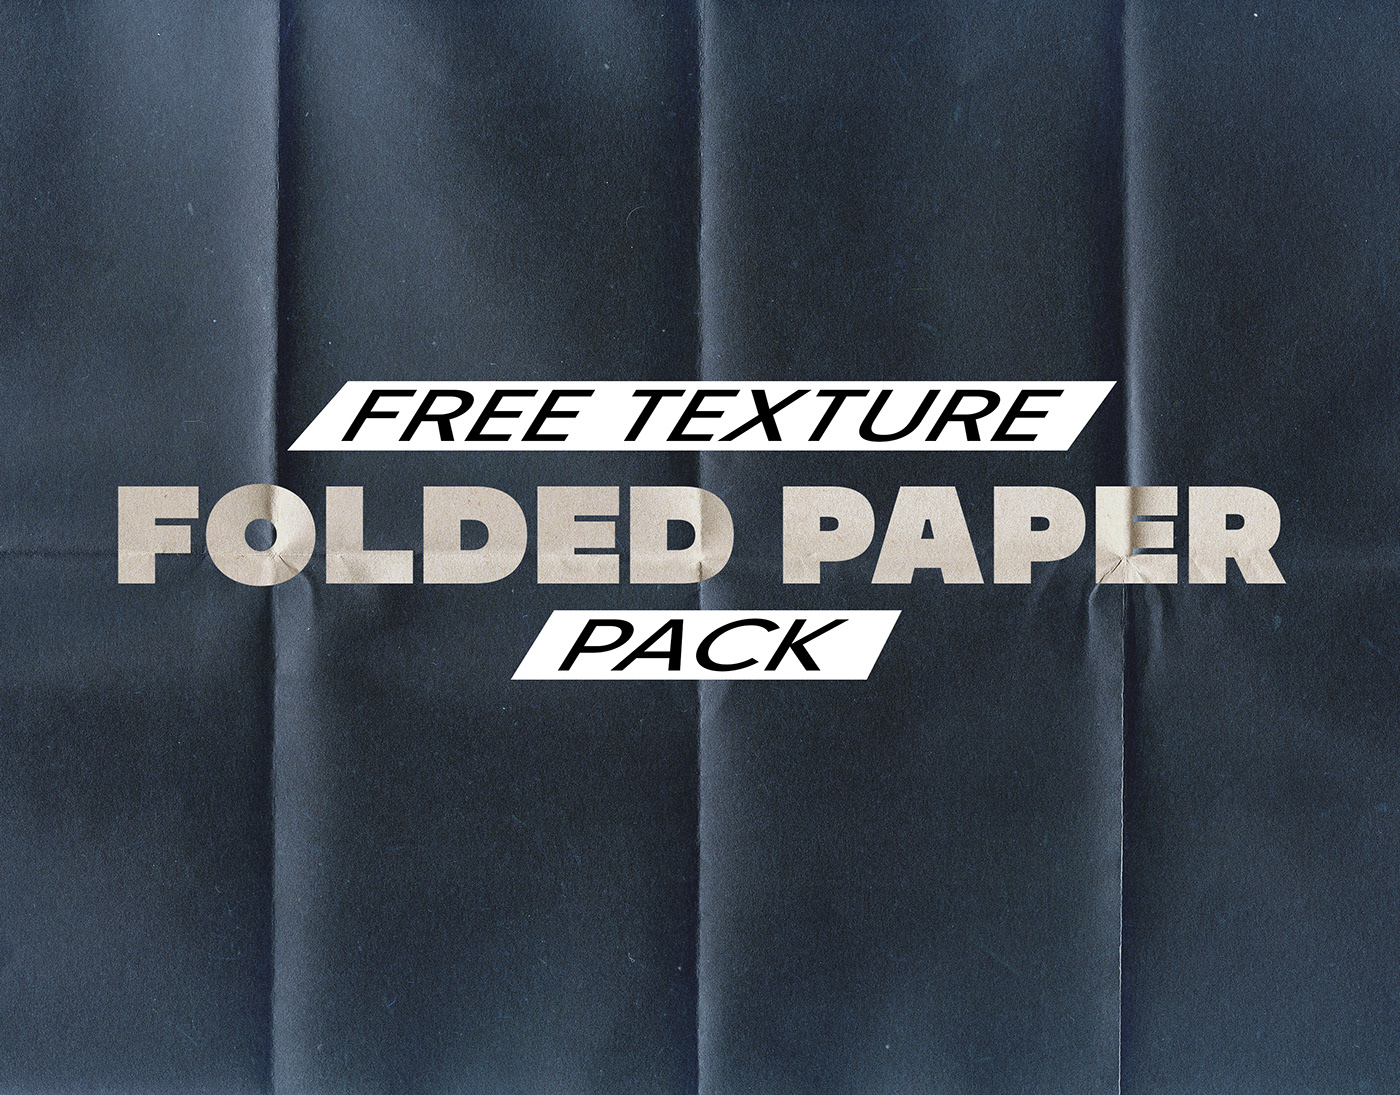 folded folded paper folded paper texture free free folded paper free paper texture free texture paper Paper texture texture